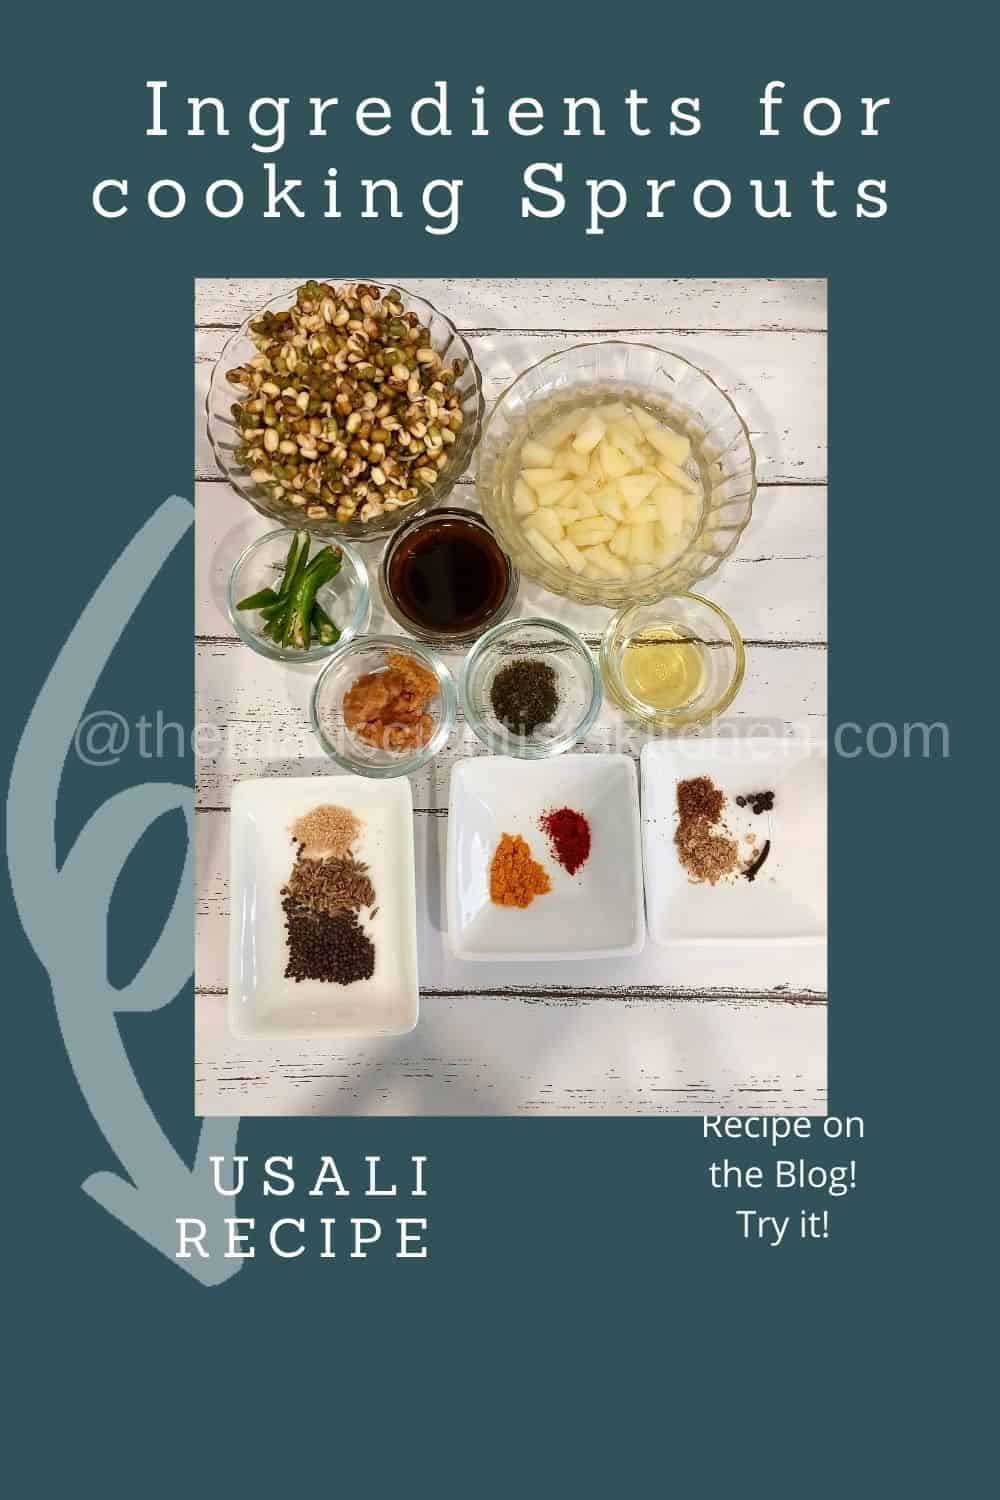 Simple and delicious Goan Usali recipe needs these few ingredients.